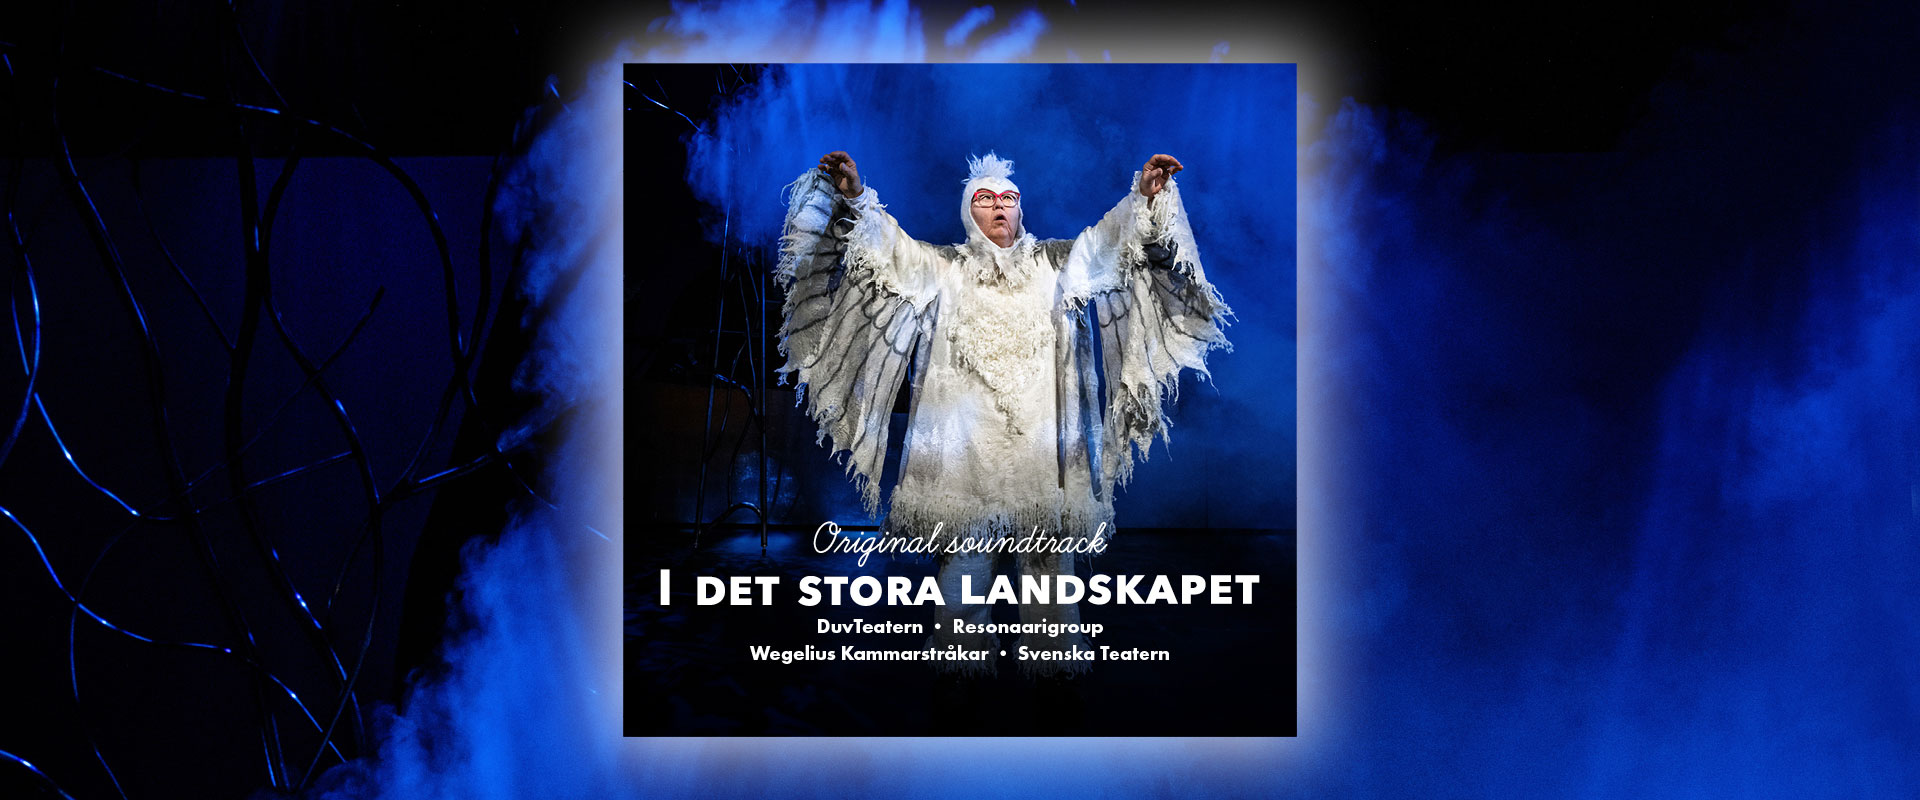 The cover of the Original soundtrack “I det stora landskapet”, made by DuvTeatern, Resonaarigroup, Wegelius Kammarstråkar and Svenska Teatern. The background is a mix of blue and black, the blue color is a reflection against stage smoke. In front DuvTeatern actress Irina von Martens with her arms stretched to the sides like her role as an owl.